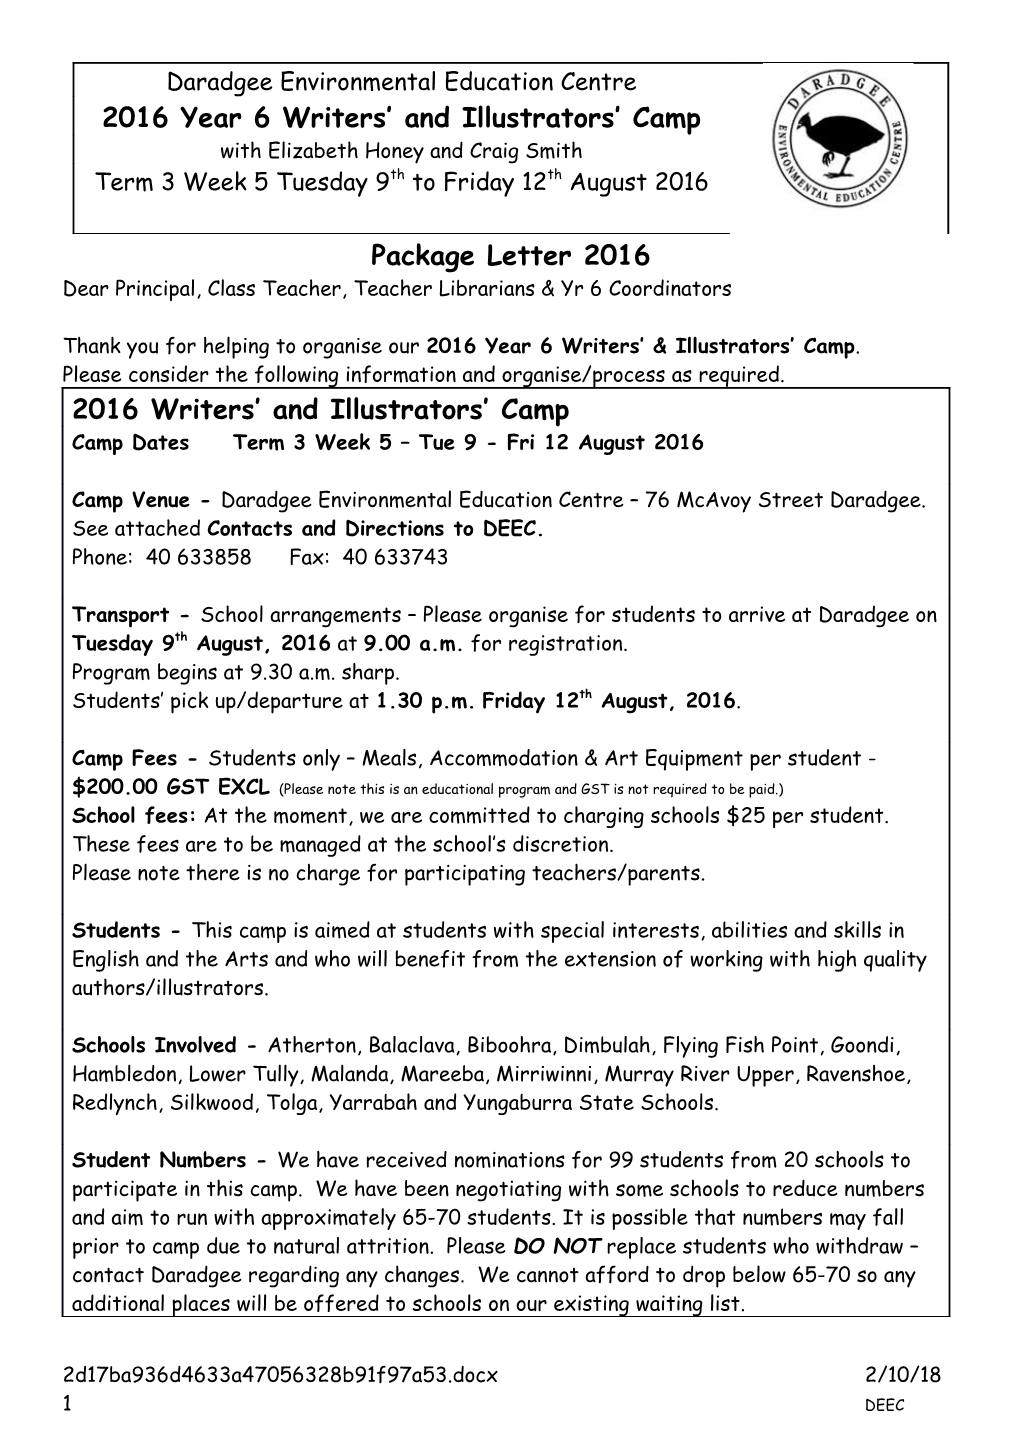 Package Letter 2016